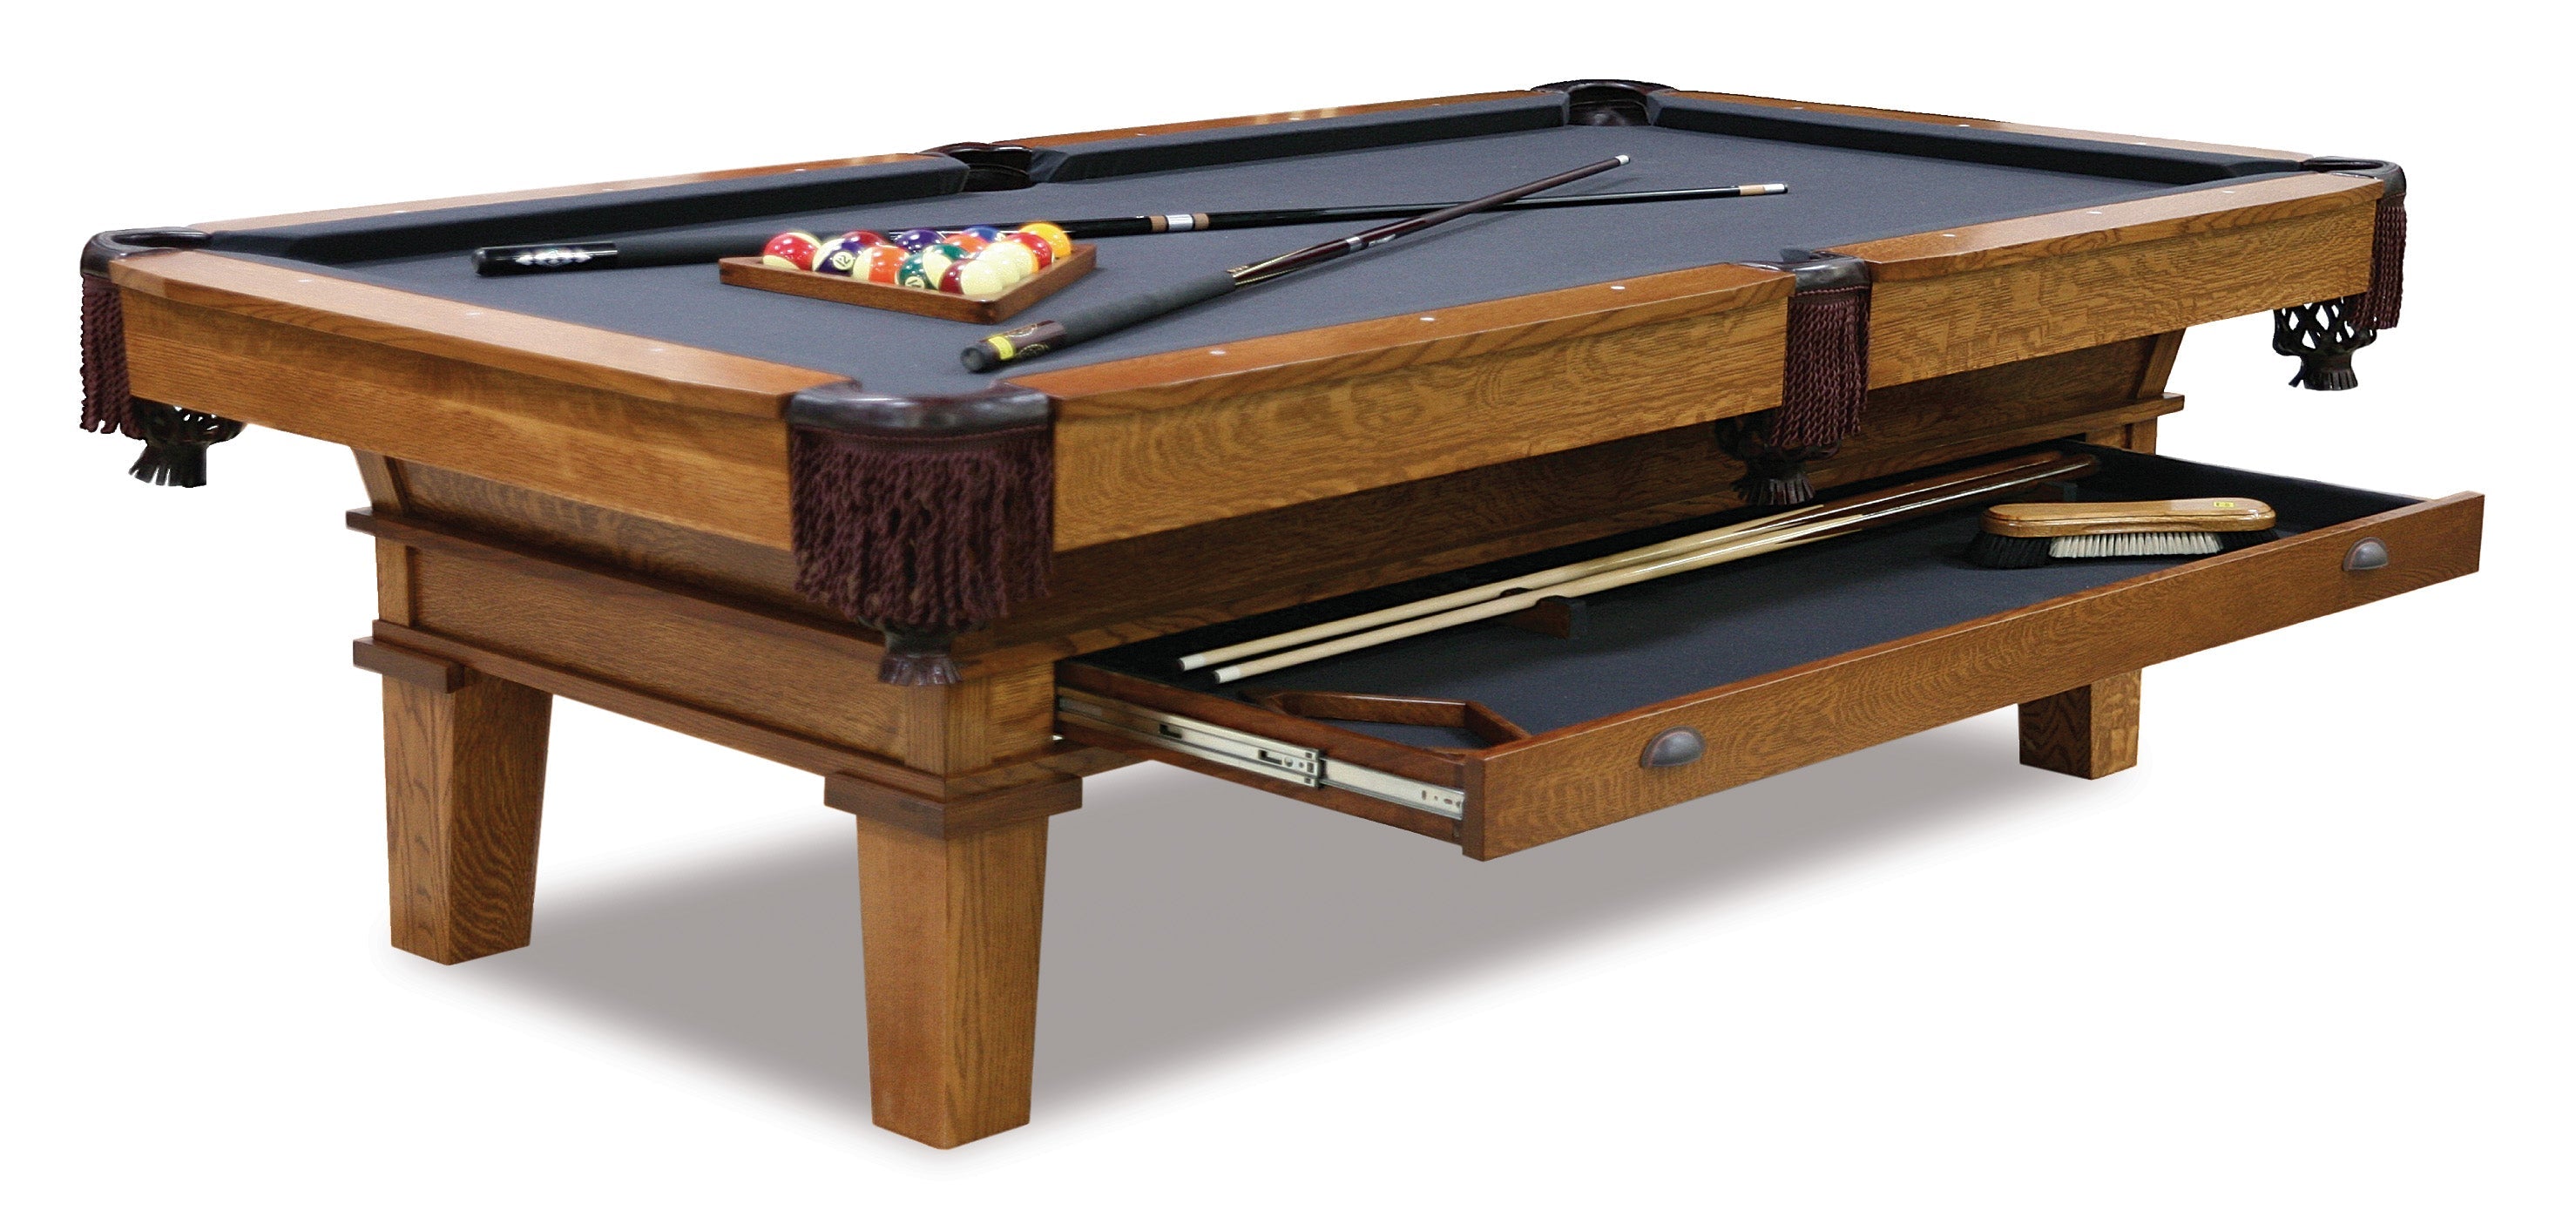 7' Hand-crafted Monroe Pool Table (Quarter sawn Oak)